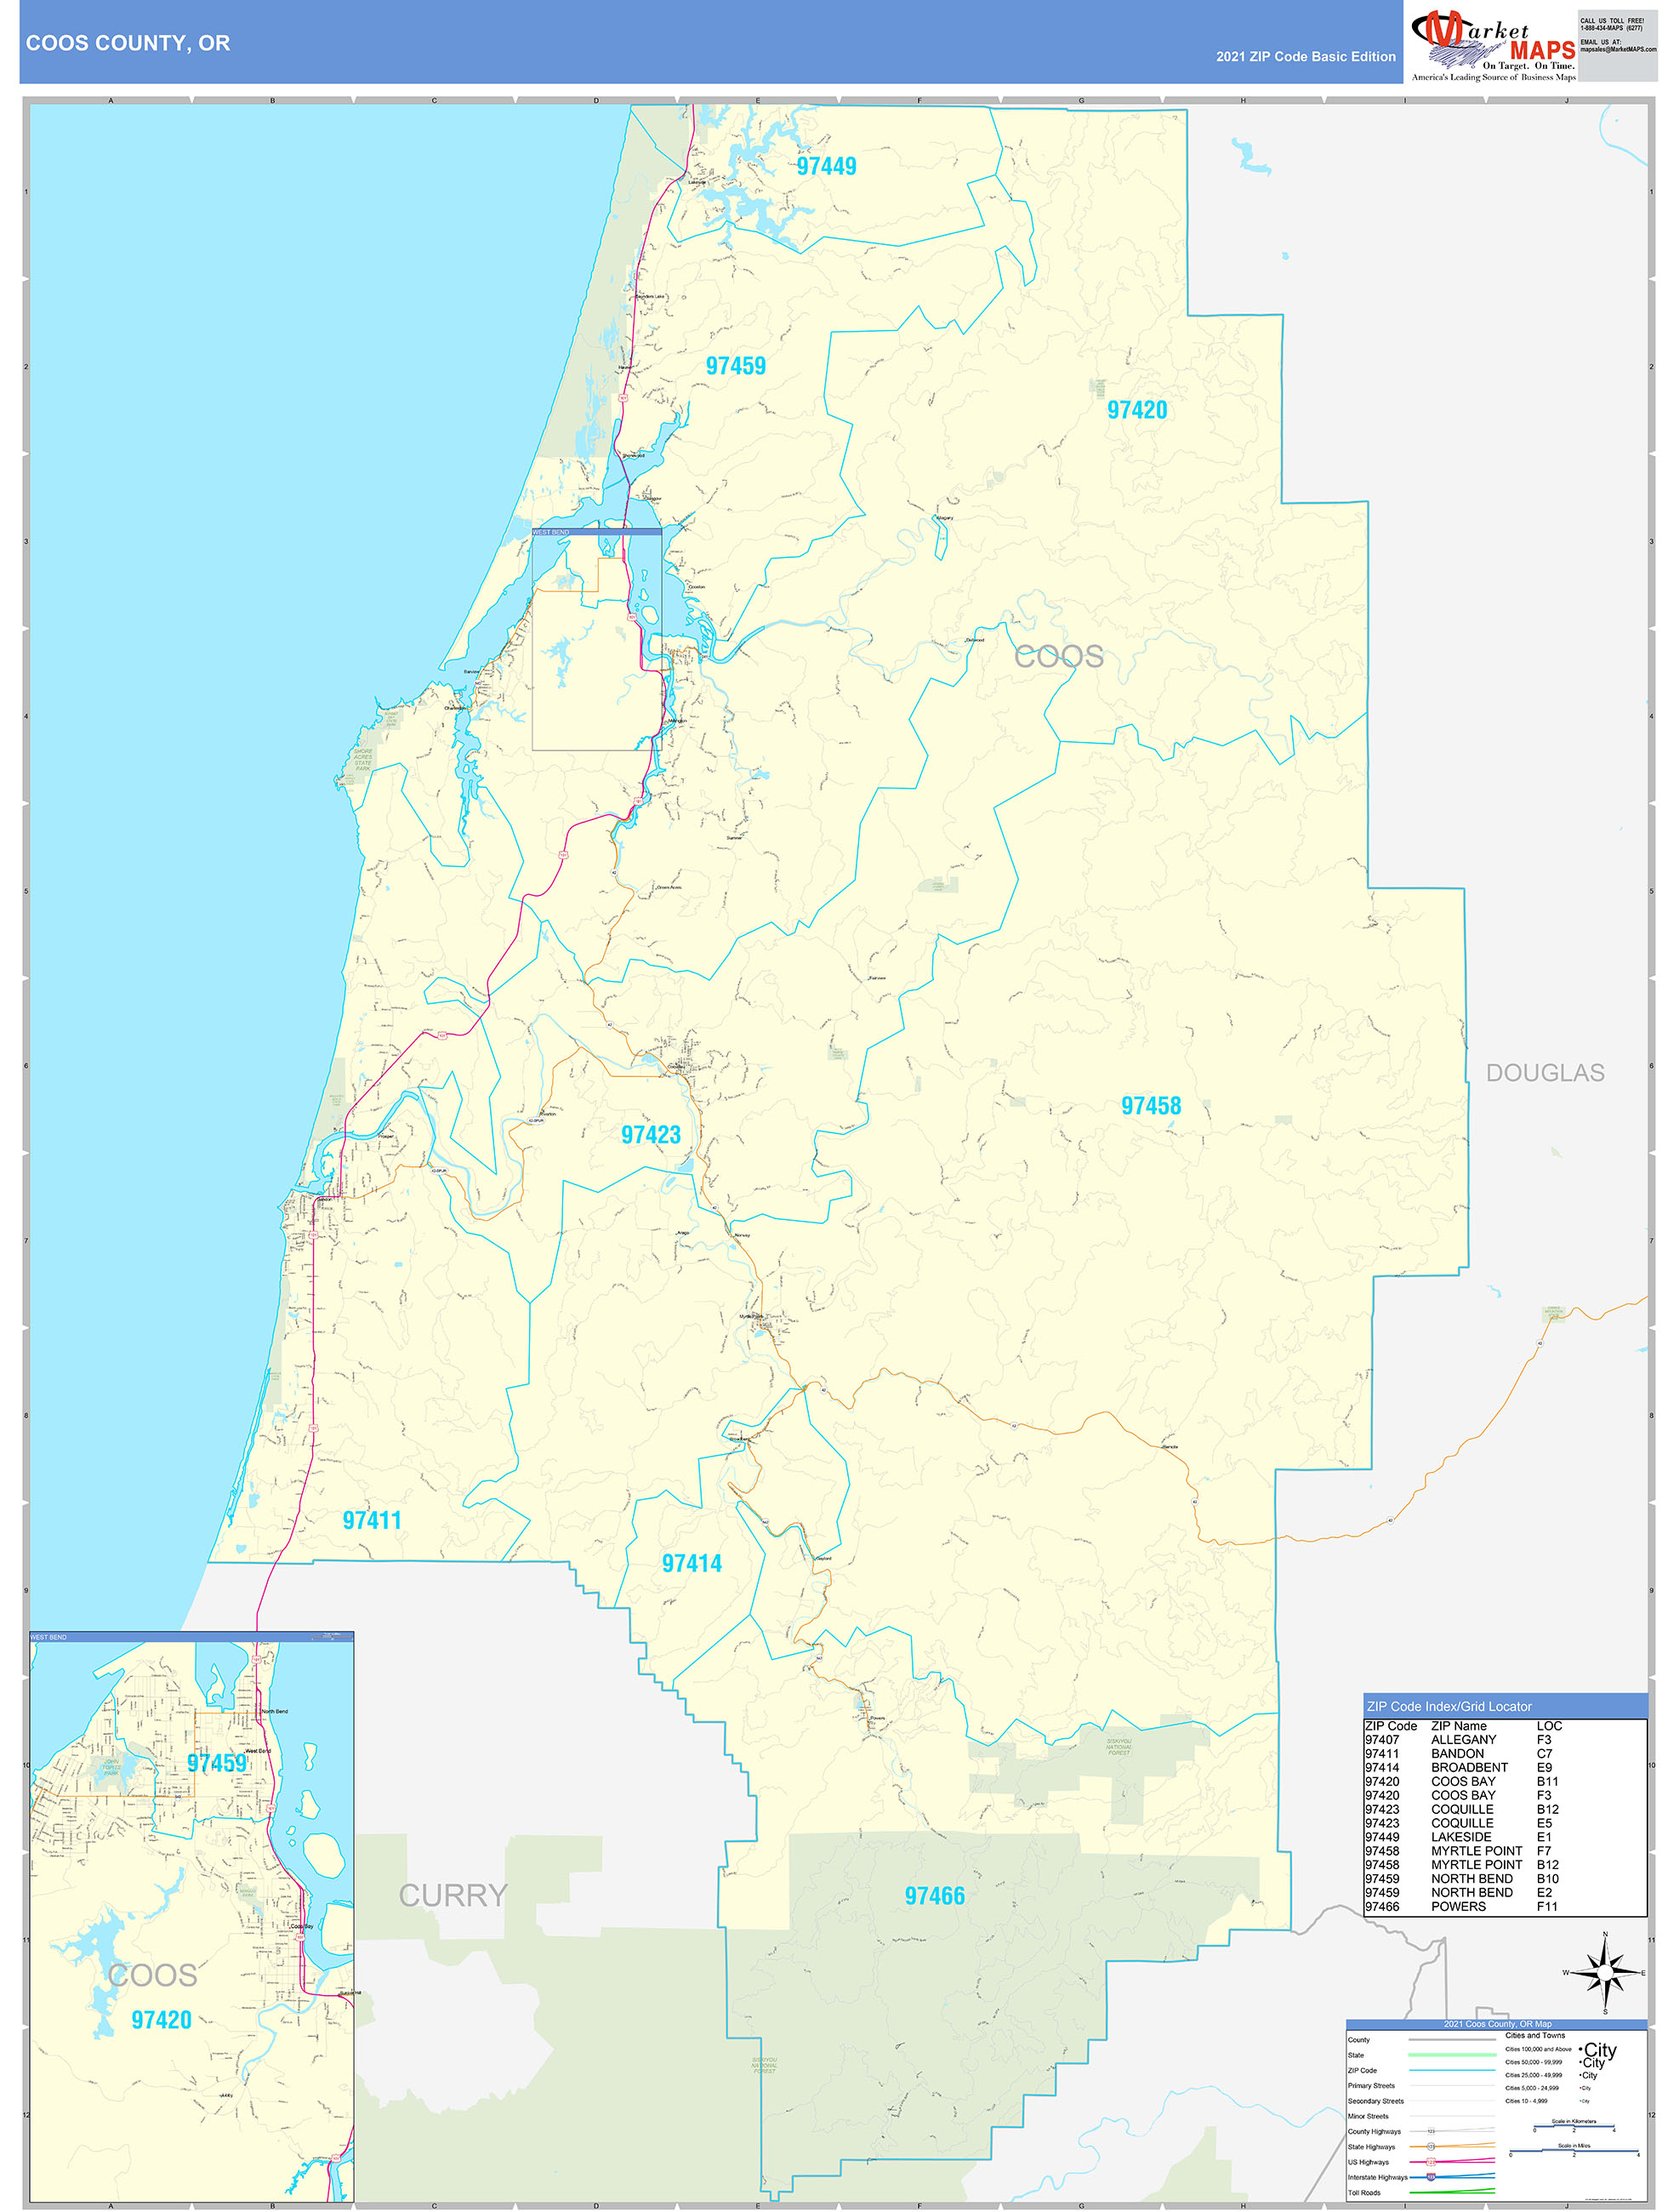 Coos County, OR Zip Code Wall Map Basic Style by MarketMAPS MapSales